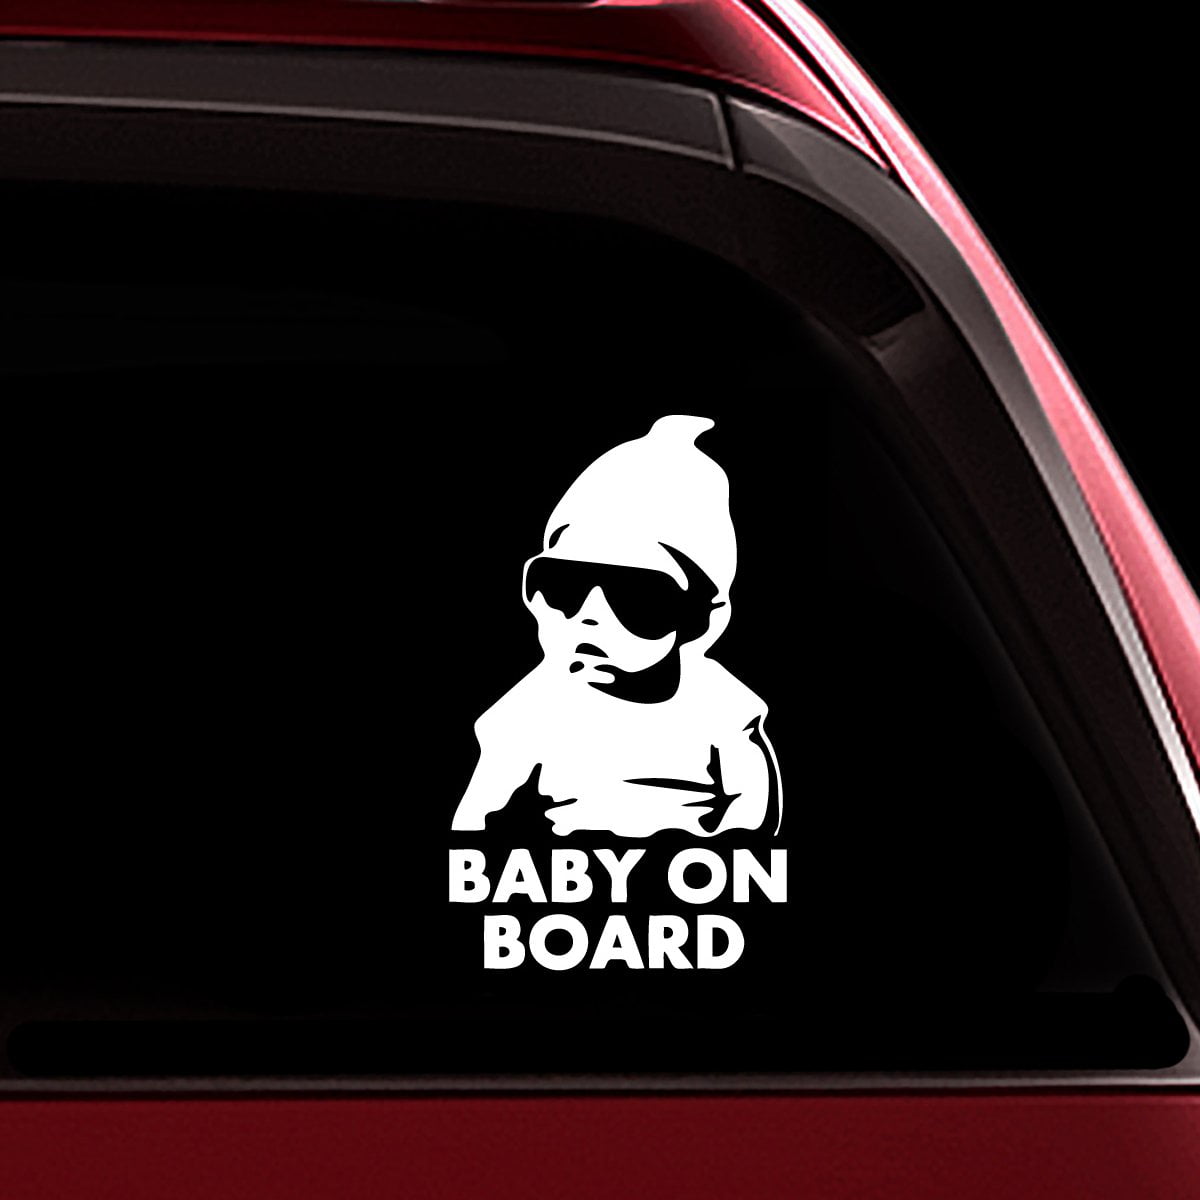 TOTOMO Baby on Board Sticker for Cars Funny Cute Safety Caution Decal Sign  for Car Window and Bumper No Need for Magnet or Suction Cup - Carlos from  The Hangover 